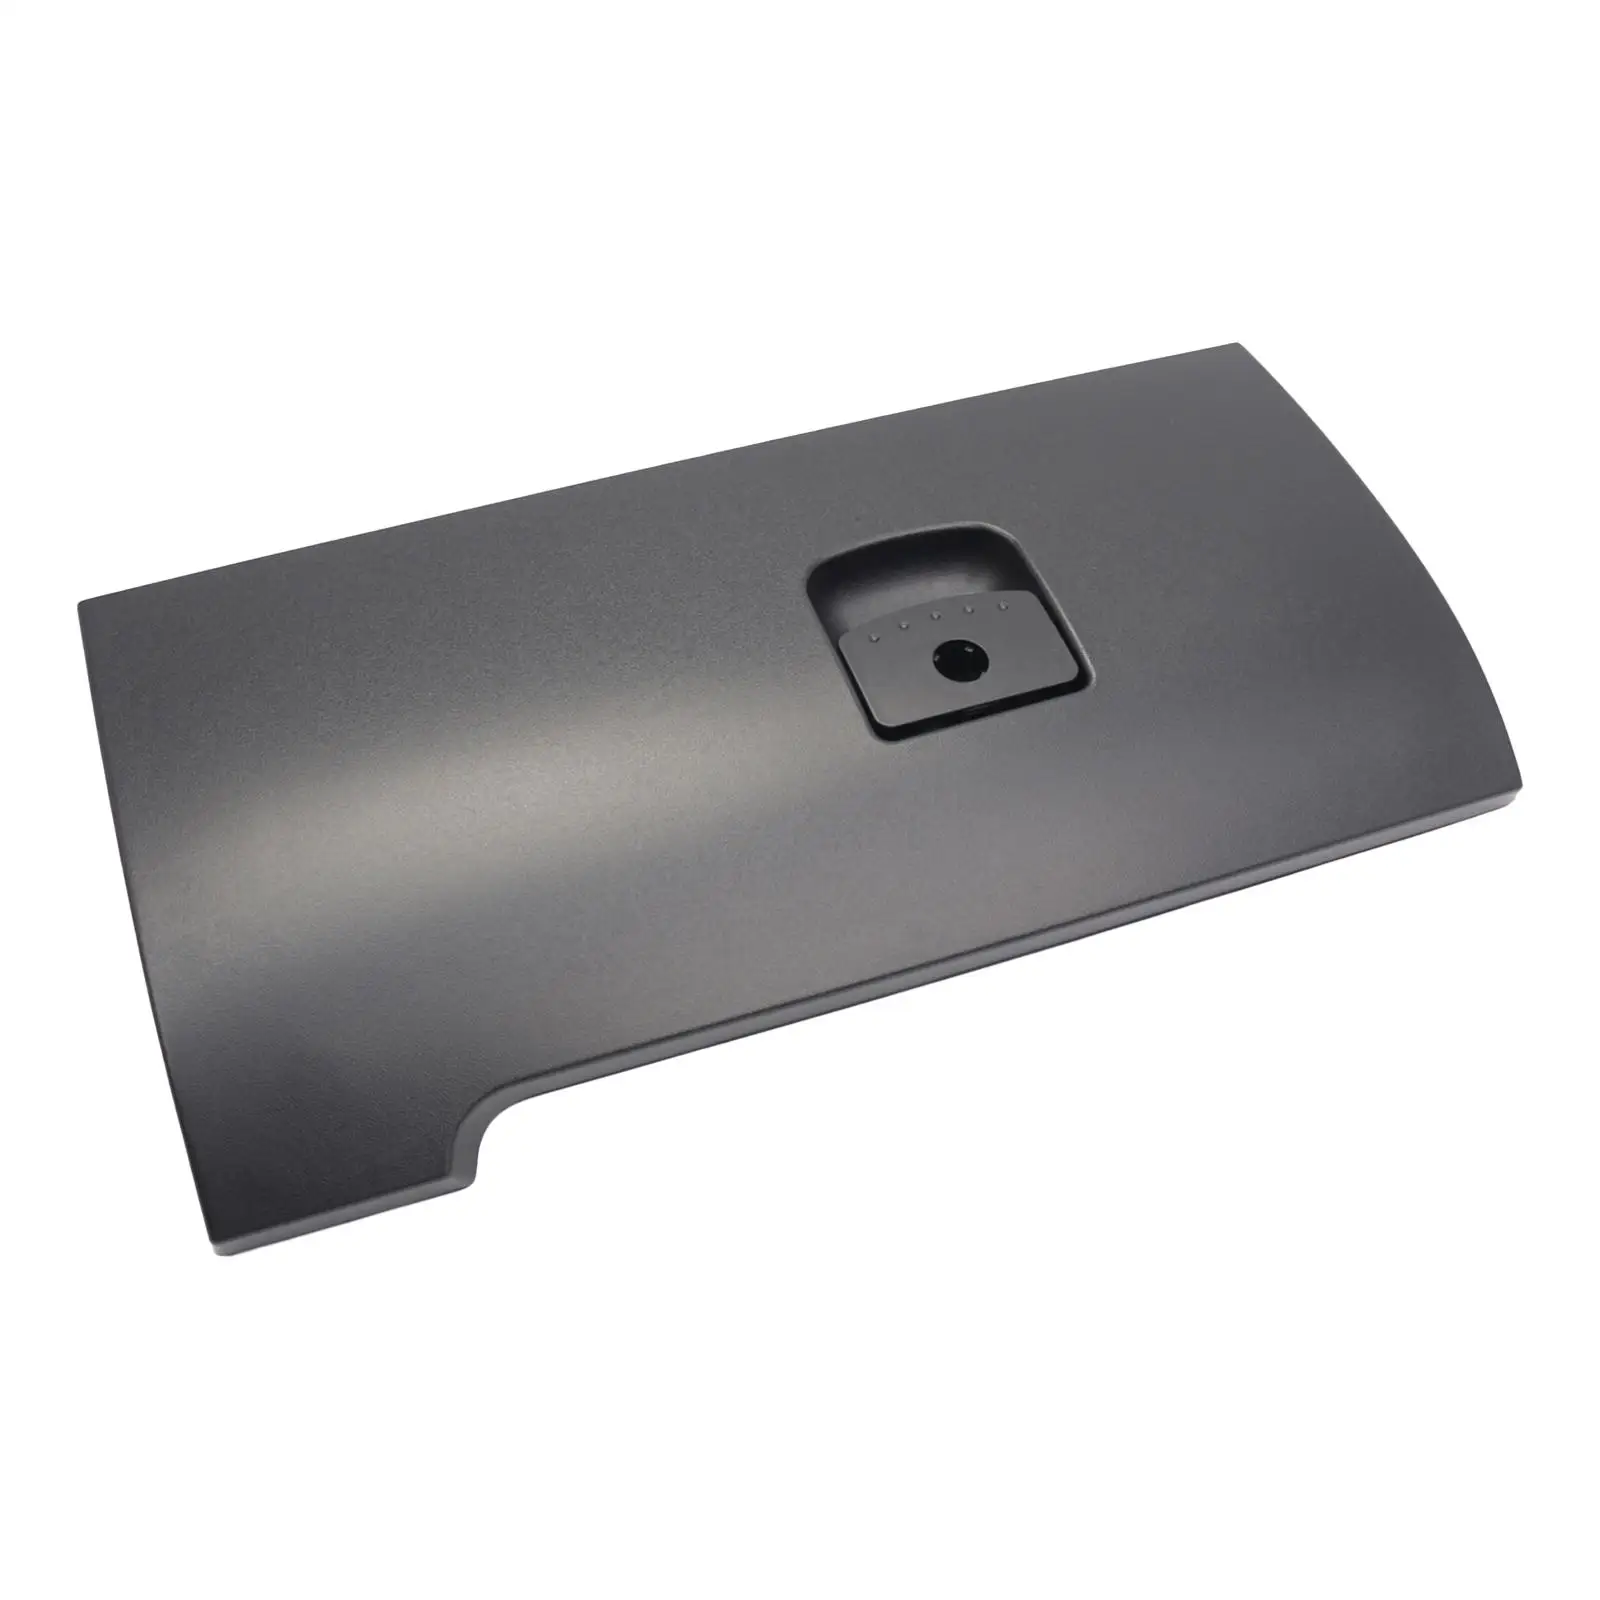 Glove Box Door Lid 1C1880300G High Quality for VW Beetle 2003-2010